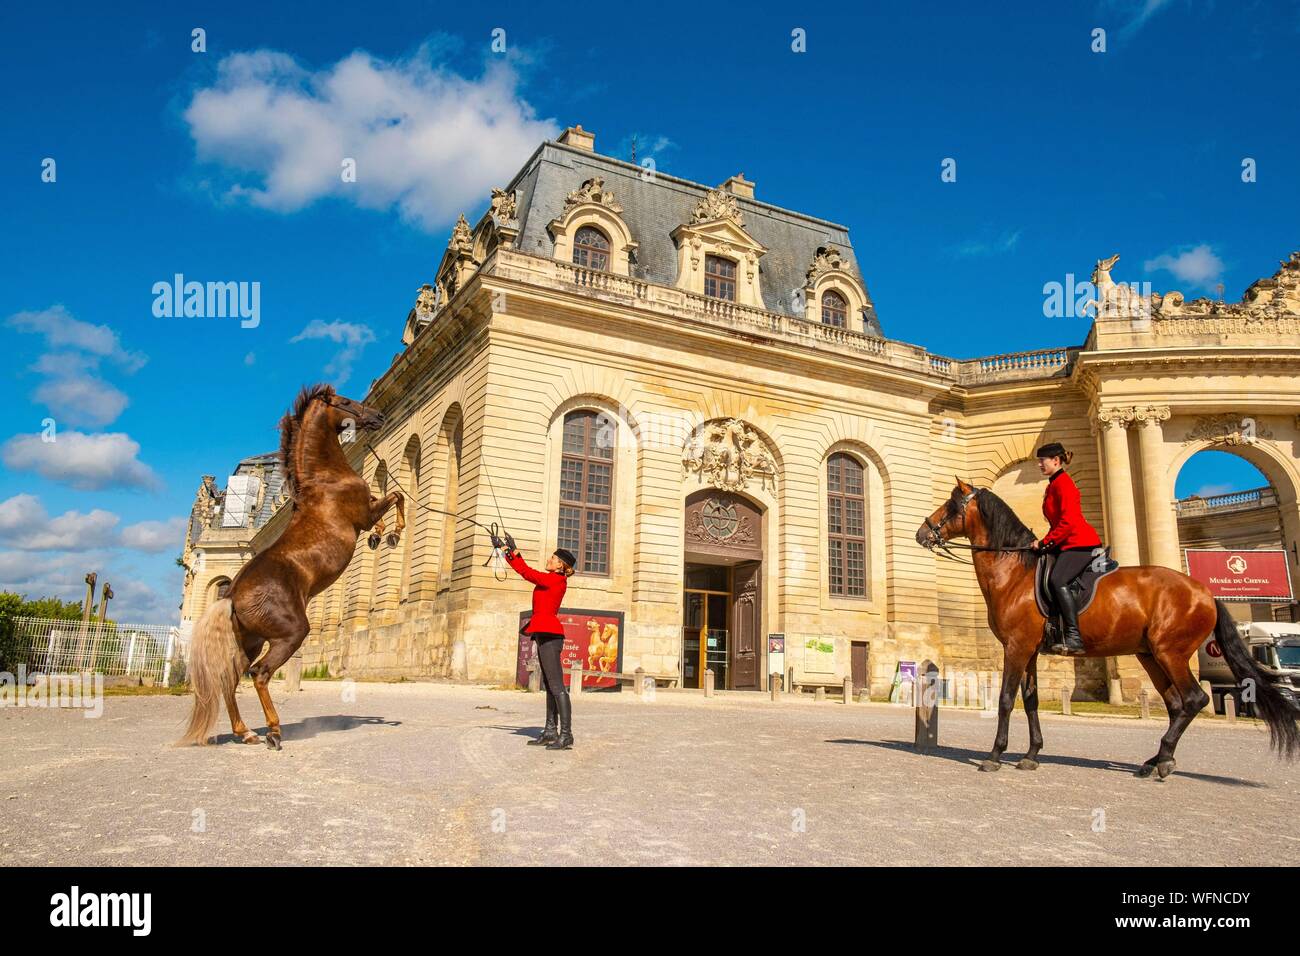 France, Oise, Chantilly, Chateau de Chantilly, the Grandes Ecuries (Great  Stables) (aerial view Stock Photo - Alamy